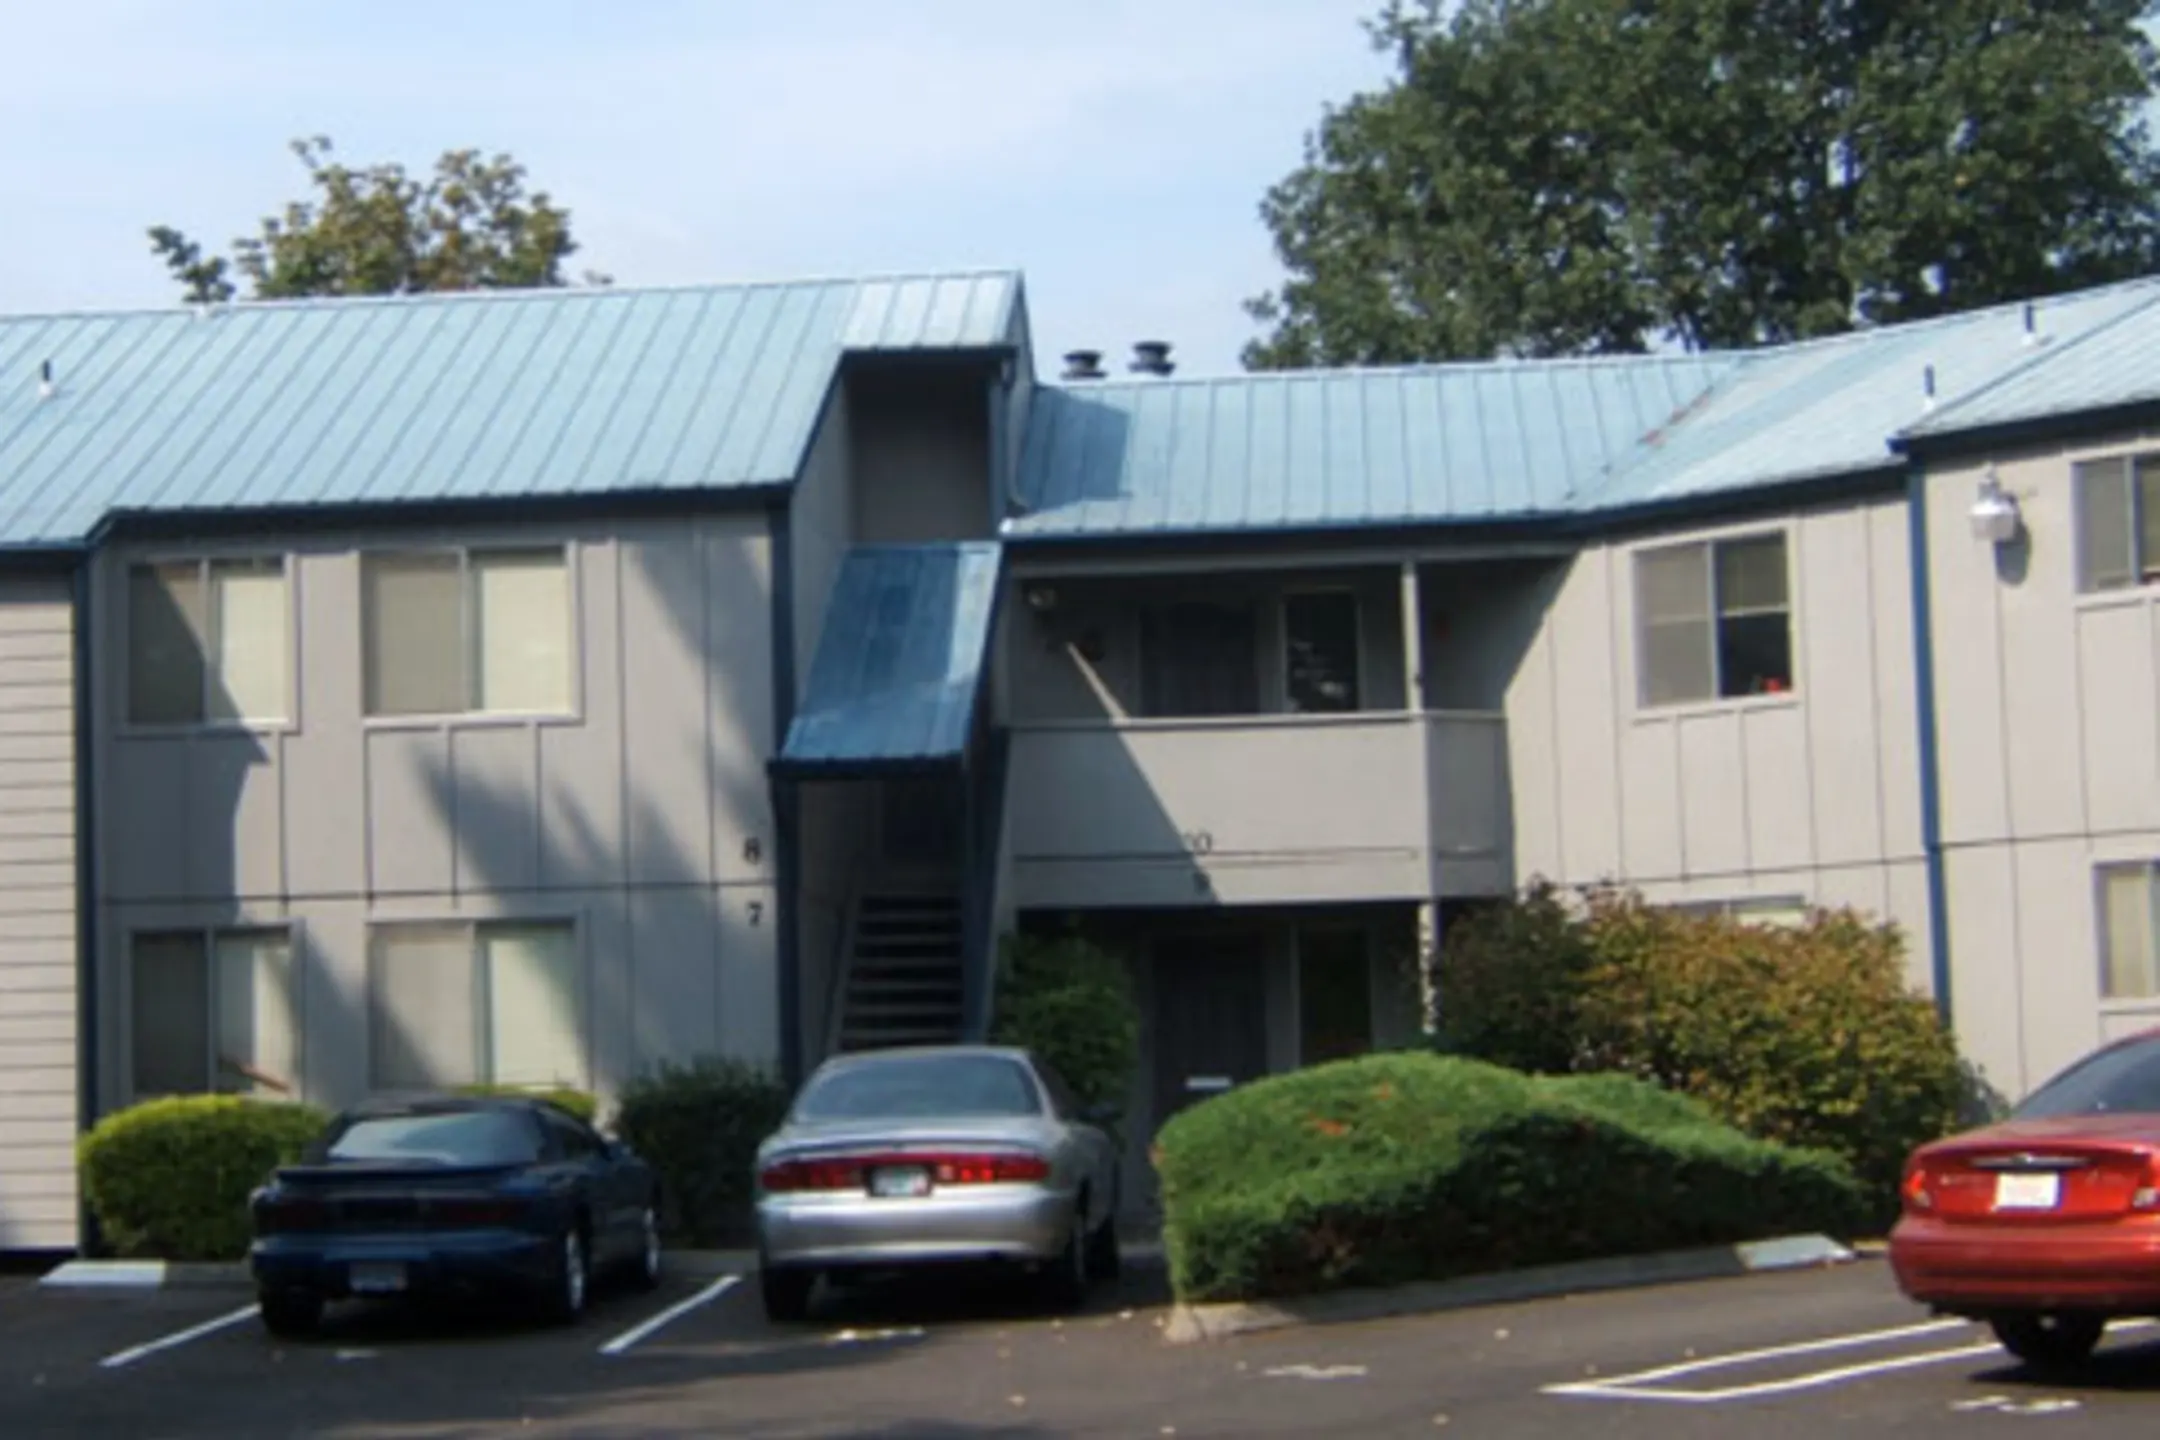 Building - Riverview - Milwaukie, OR